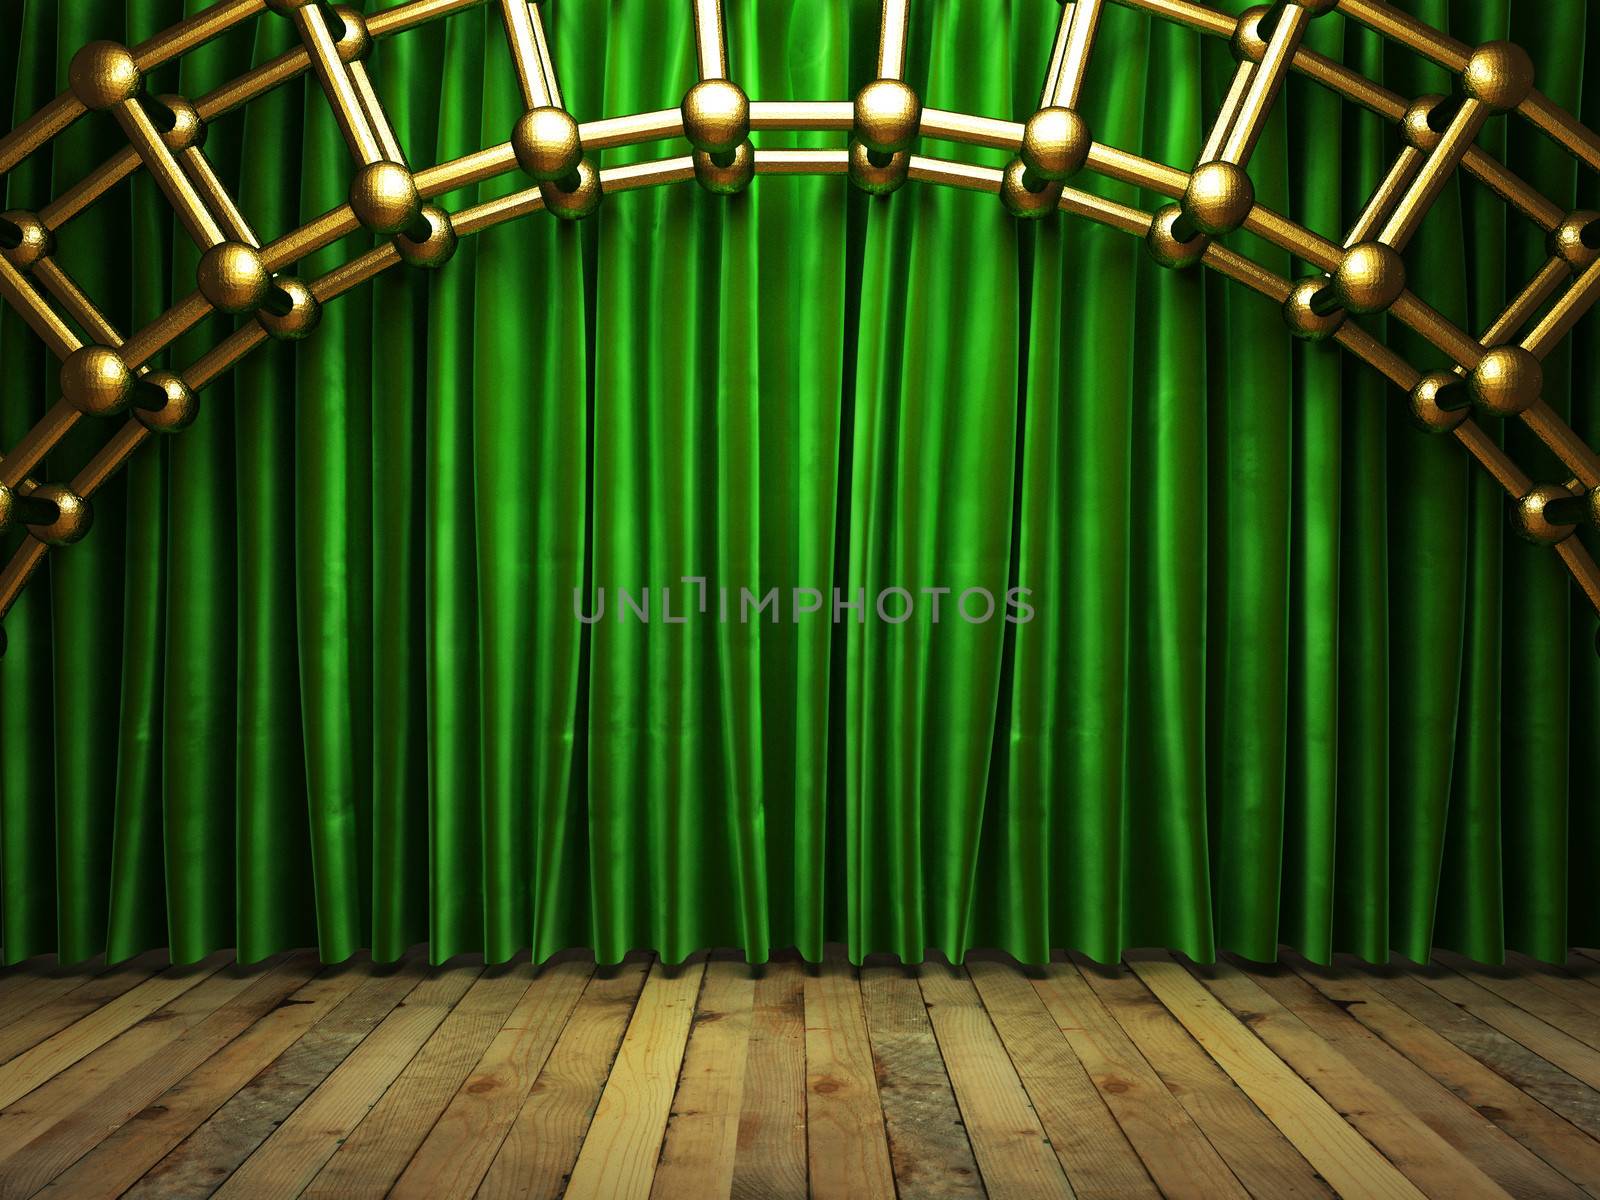 green fabrick curtain on stage by videodoctor